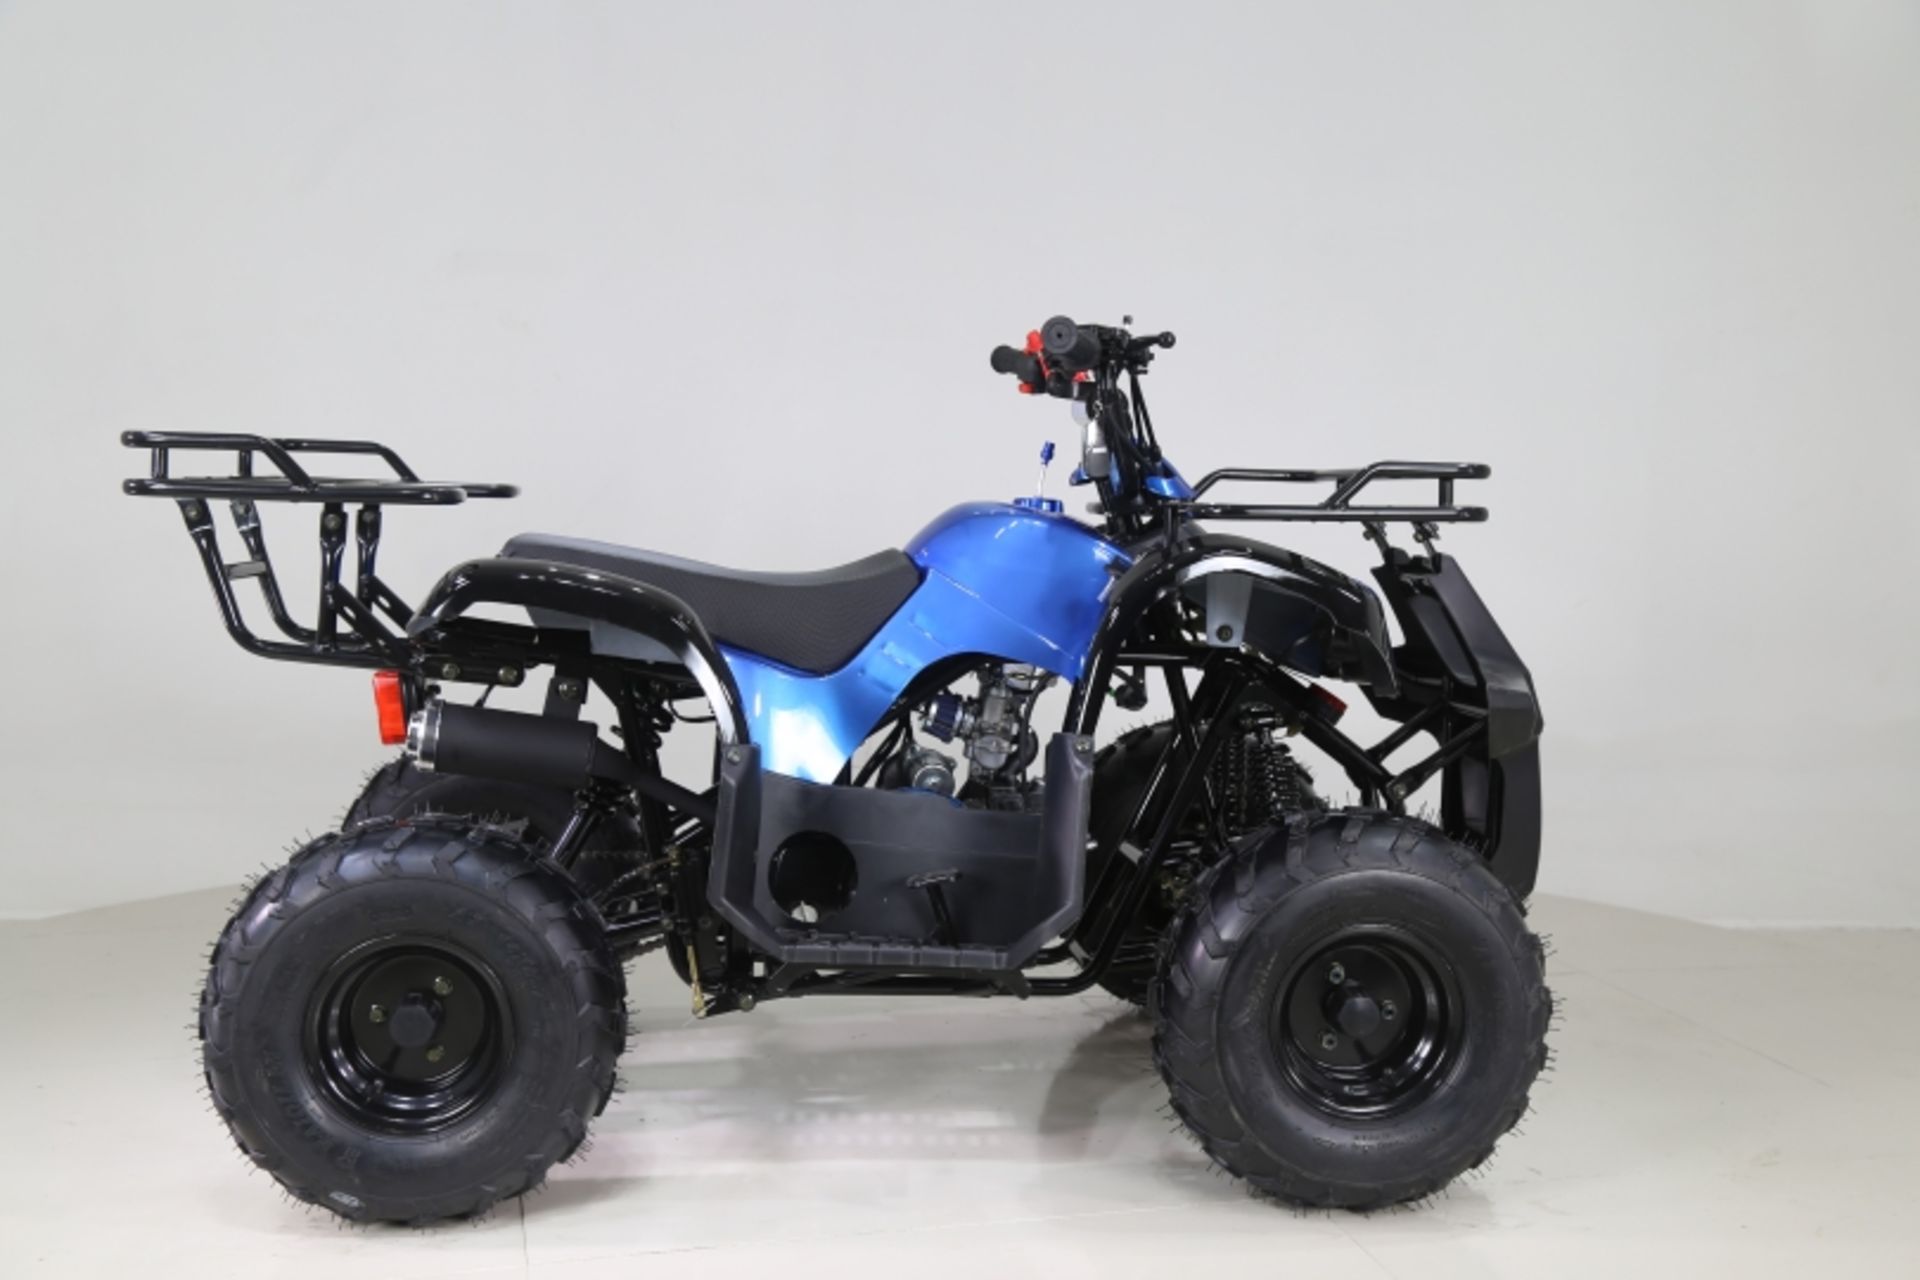 V Brand New 125cc Condo 4 Stroke Quad Bike With Front & Rear Racks - Air Cooled 4 Stroke Honda - Image 5 of 5